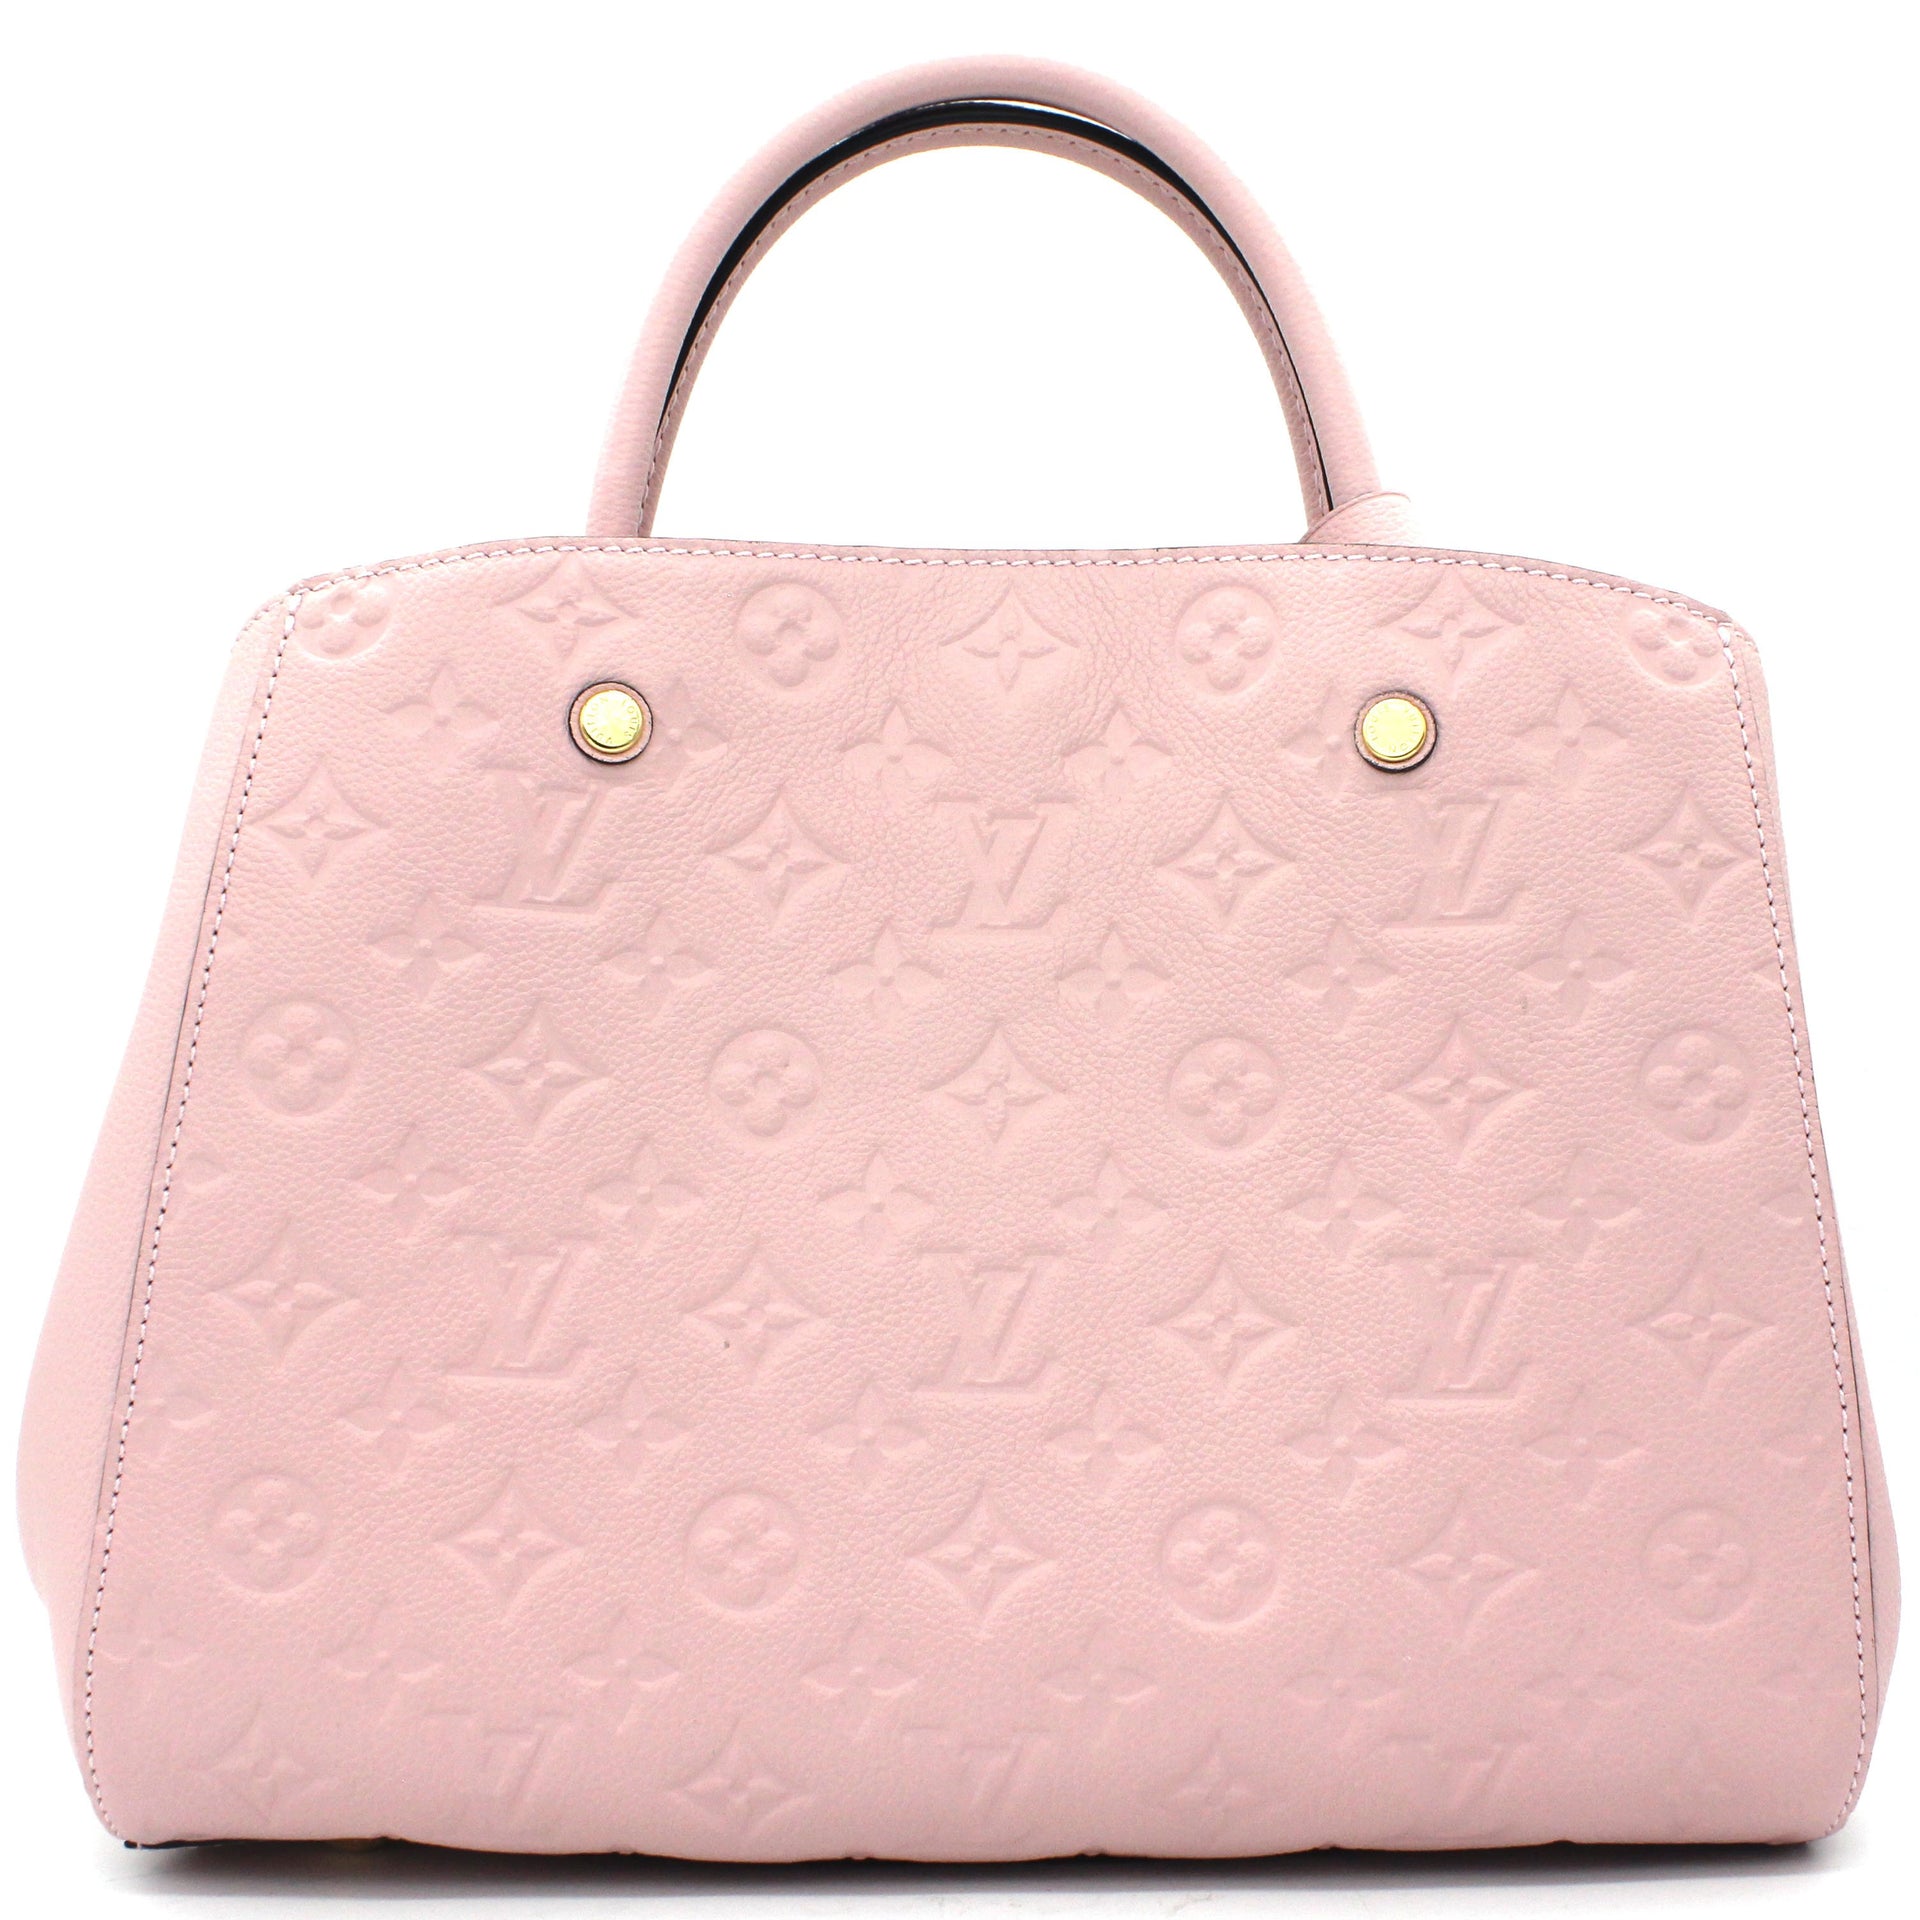 Montaigne leather handbag Louis Vuitton Pink in Leather - 21129749